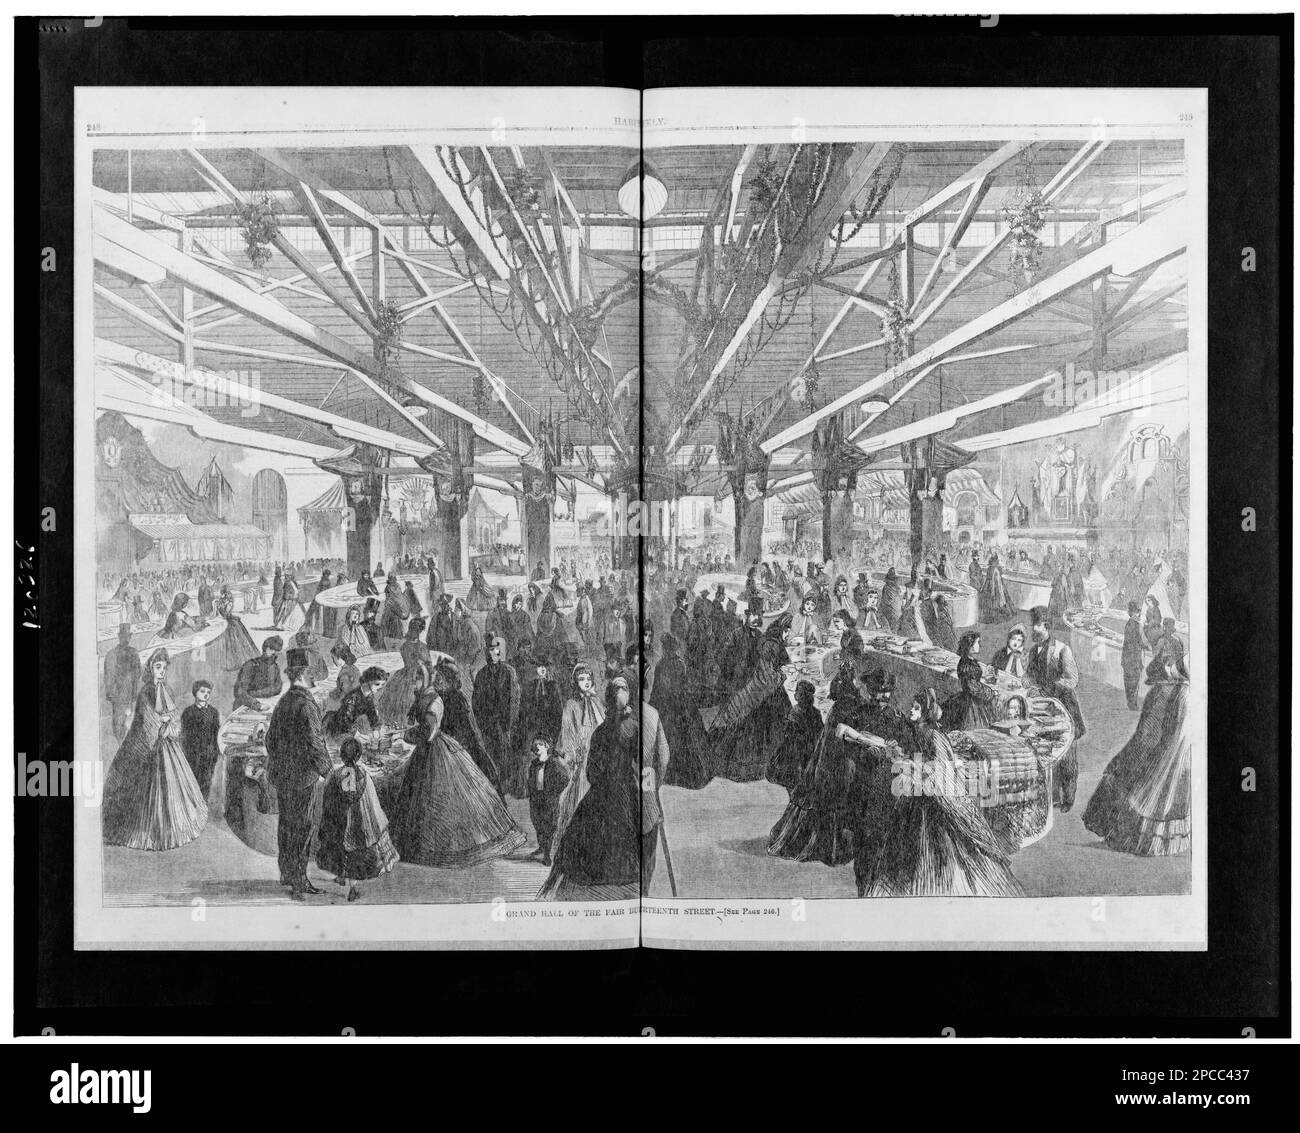 Grand hall of the fair building, Fourteenth Street. Illus. in: Harper's weekly, v. 8 (1864 April 16), p. 248-249. Fund raising, New York (State), New York, 1860-1870, Fairs, New York (State), New York, 1860-1870, Vending stands, New York (State), New York, 1860-1870, United States, History, Civil War, 1861-1865, Economic & industrial aspects. Stock Photo